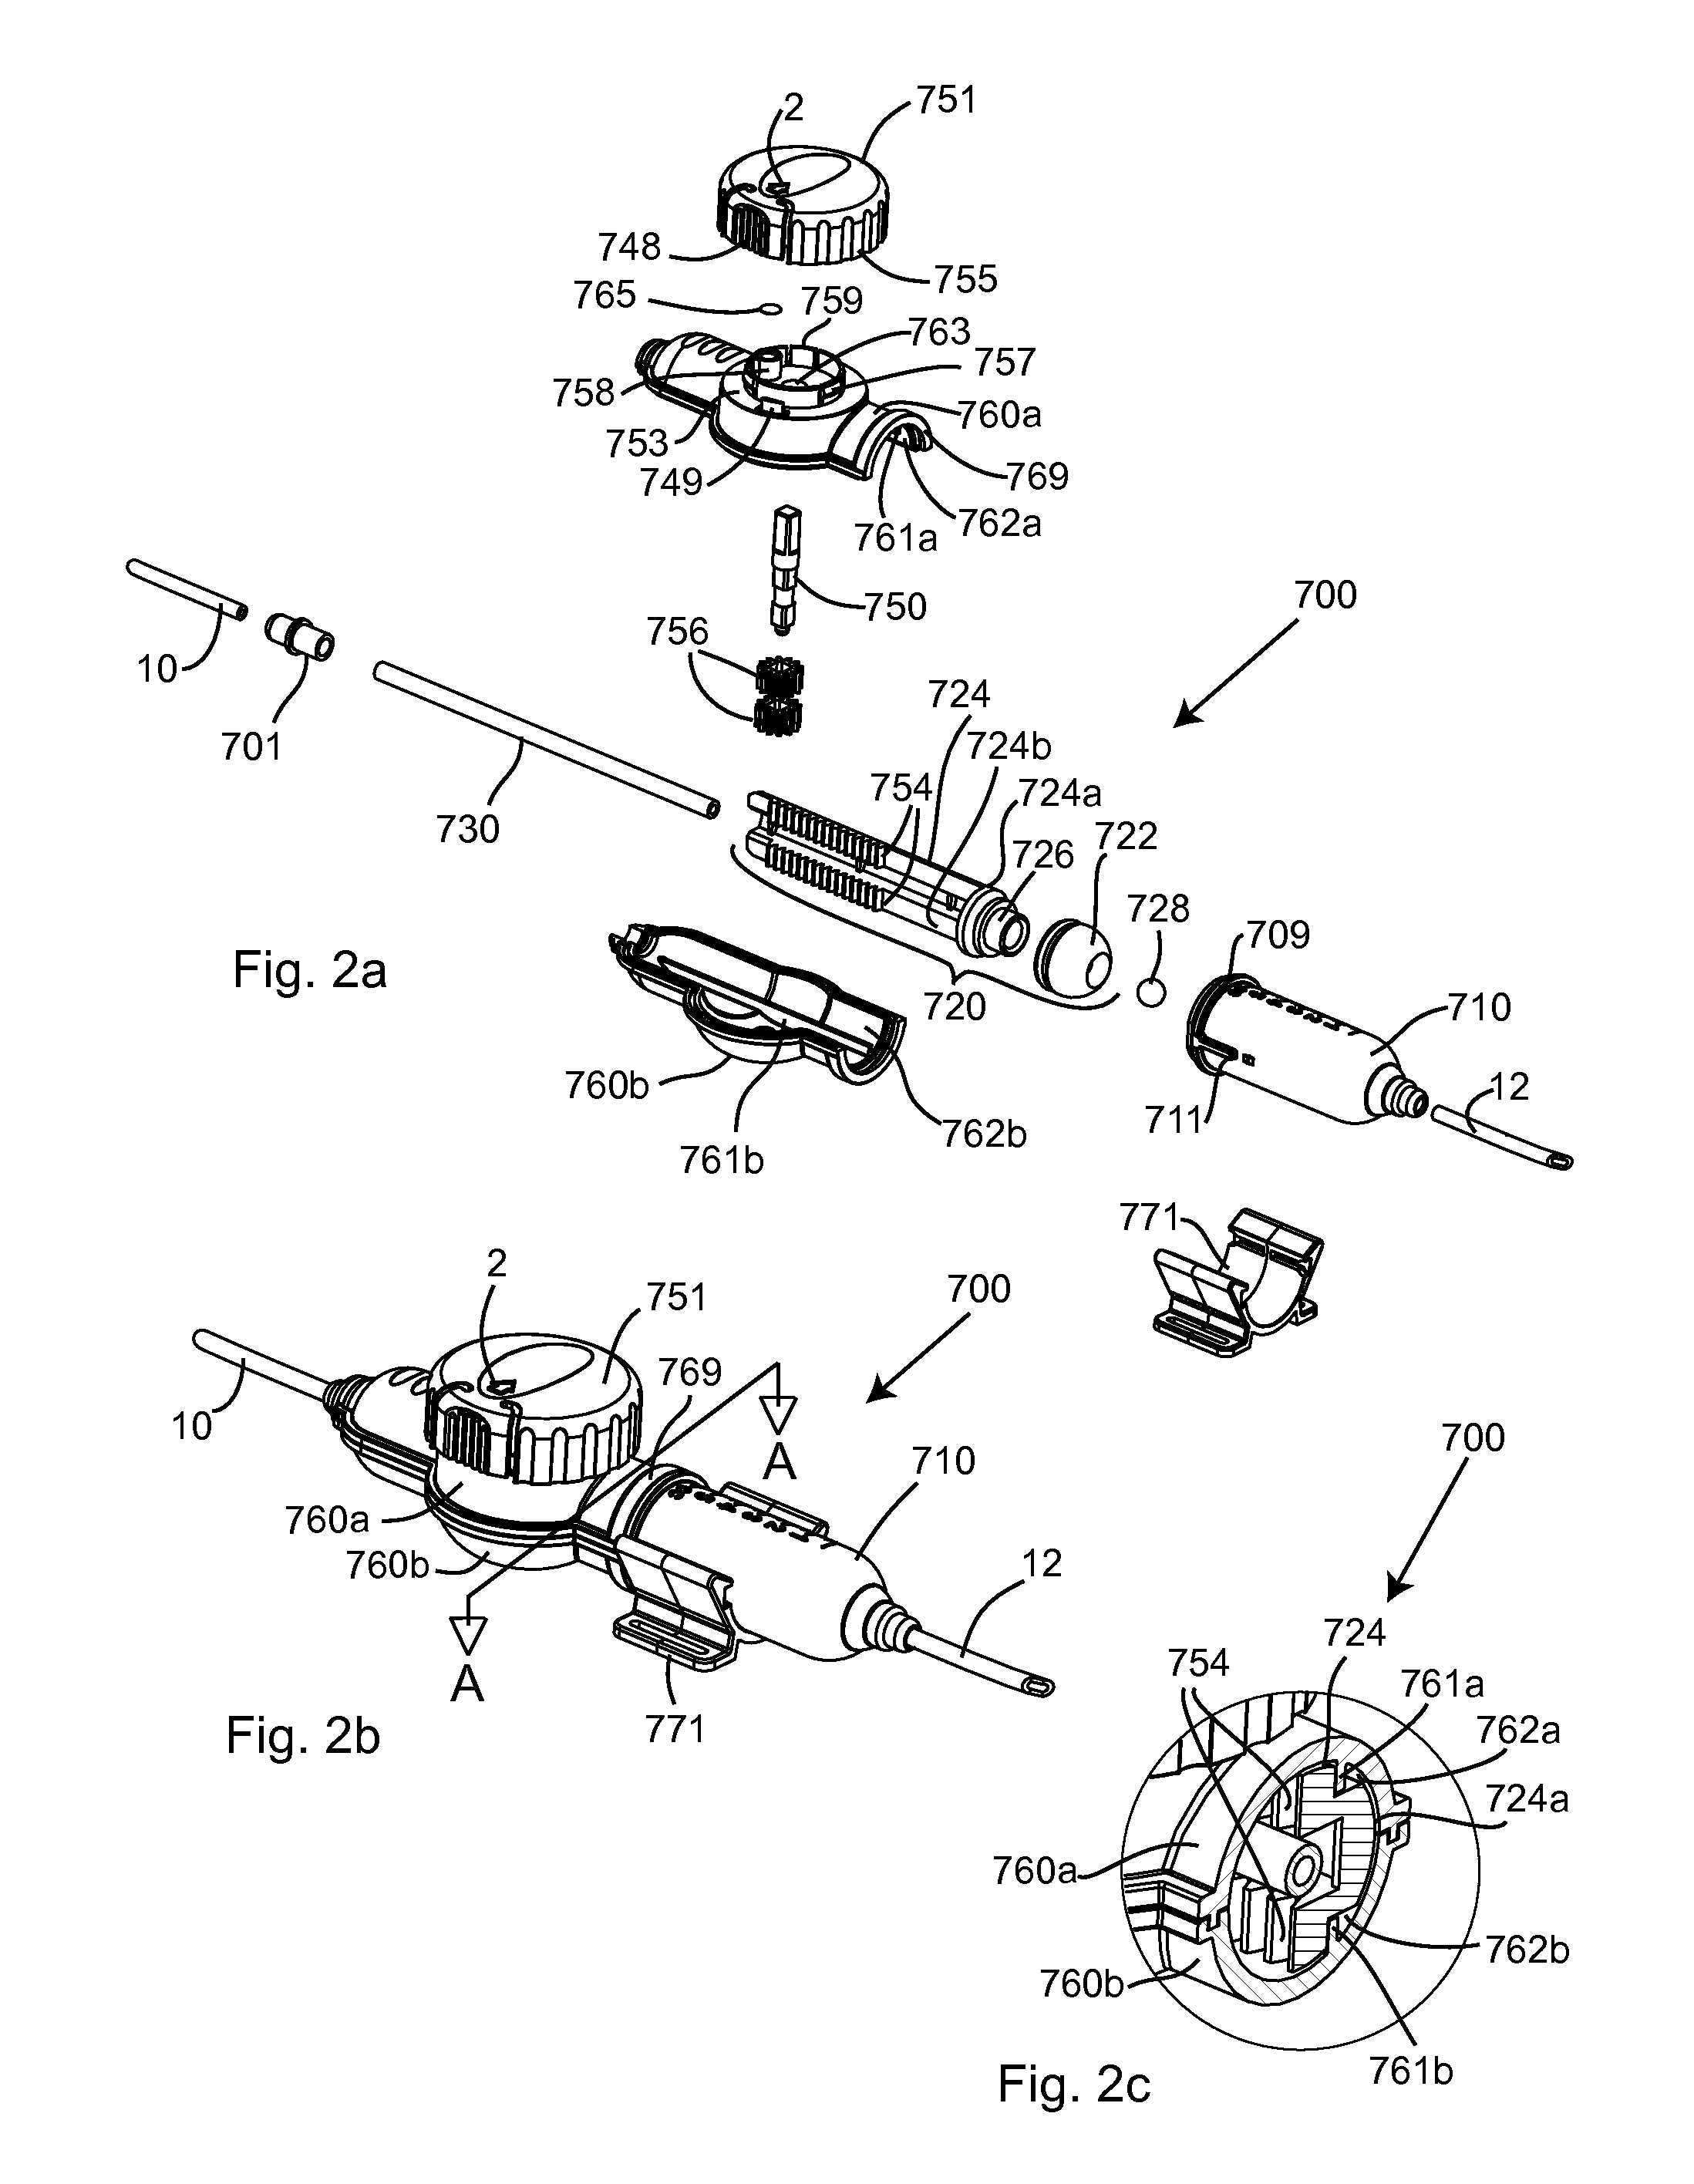 Syringe enabled for aspirating blood into a sampling site in a closed manner and method